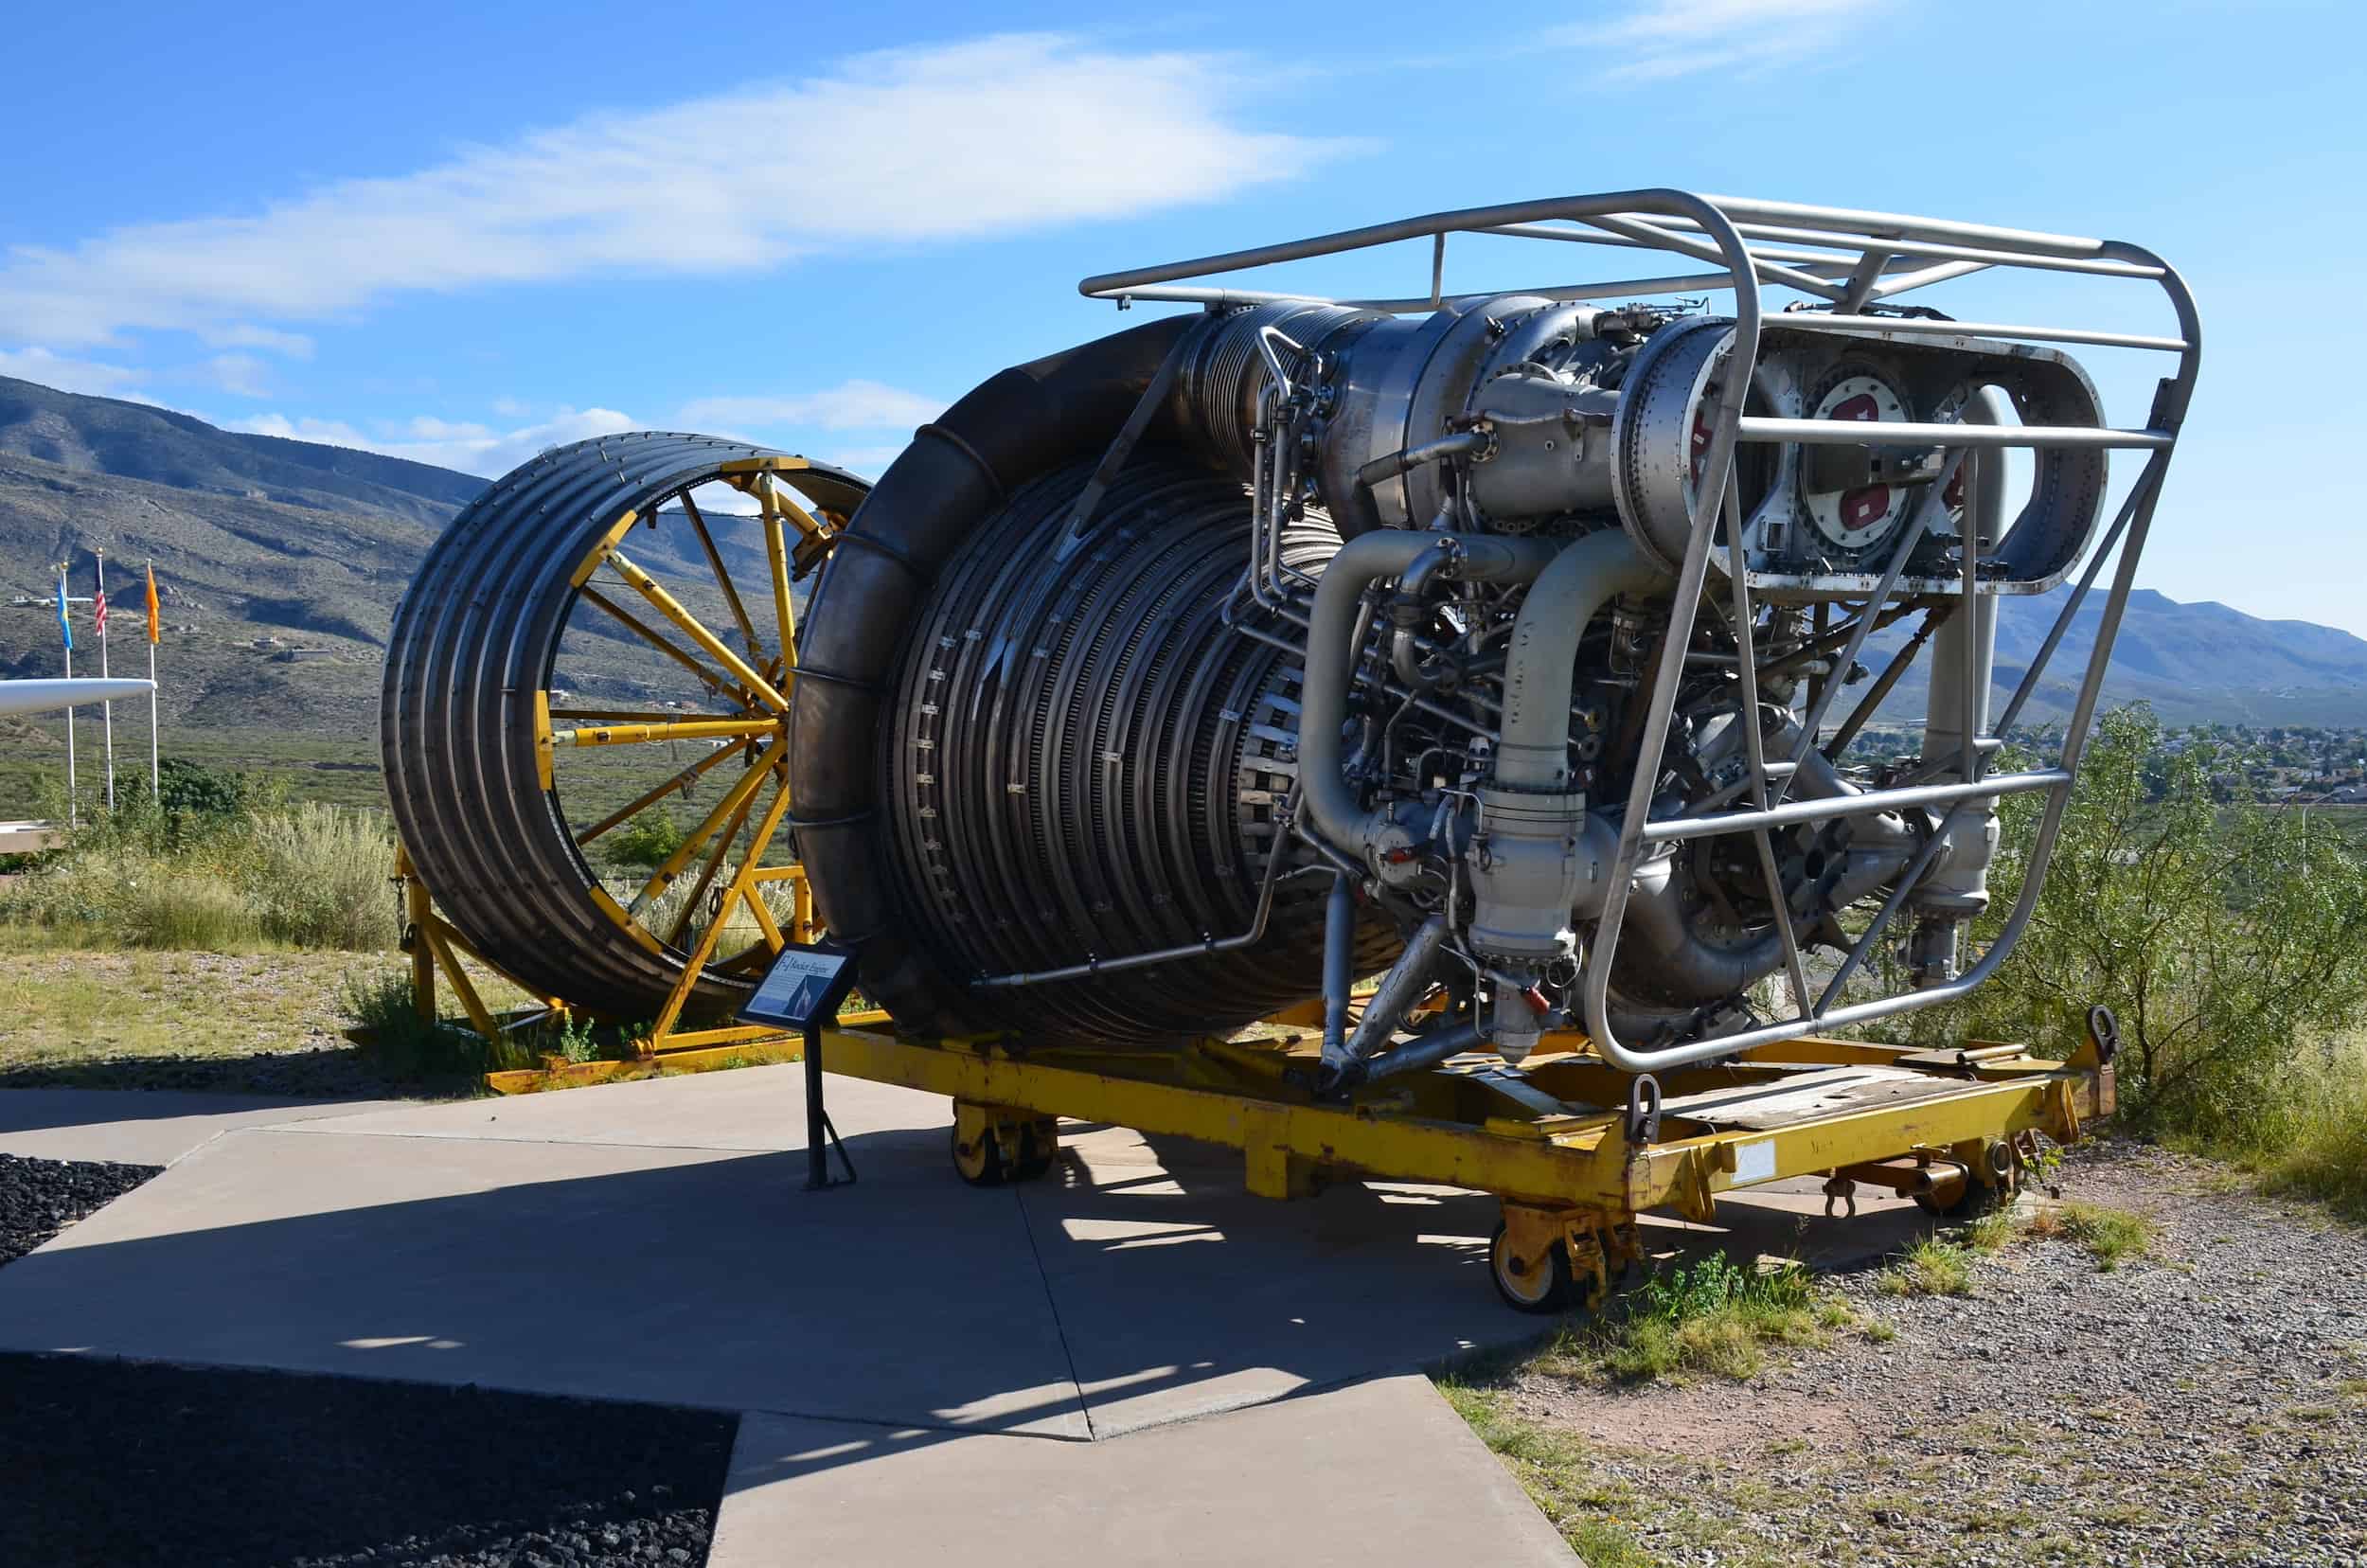 F-1 rocket engine at the New Mexico Museum of Space History in Alamogordo, New Mexico